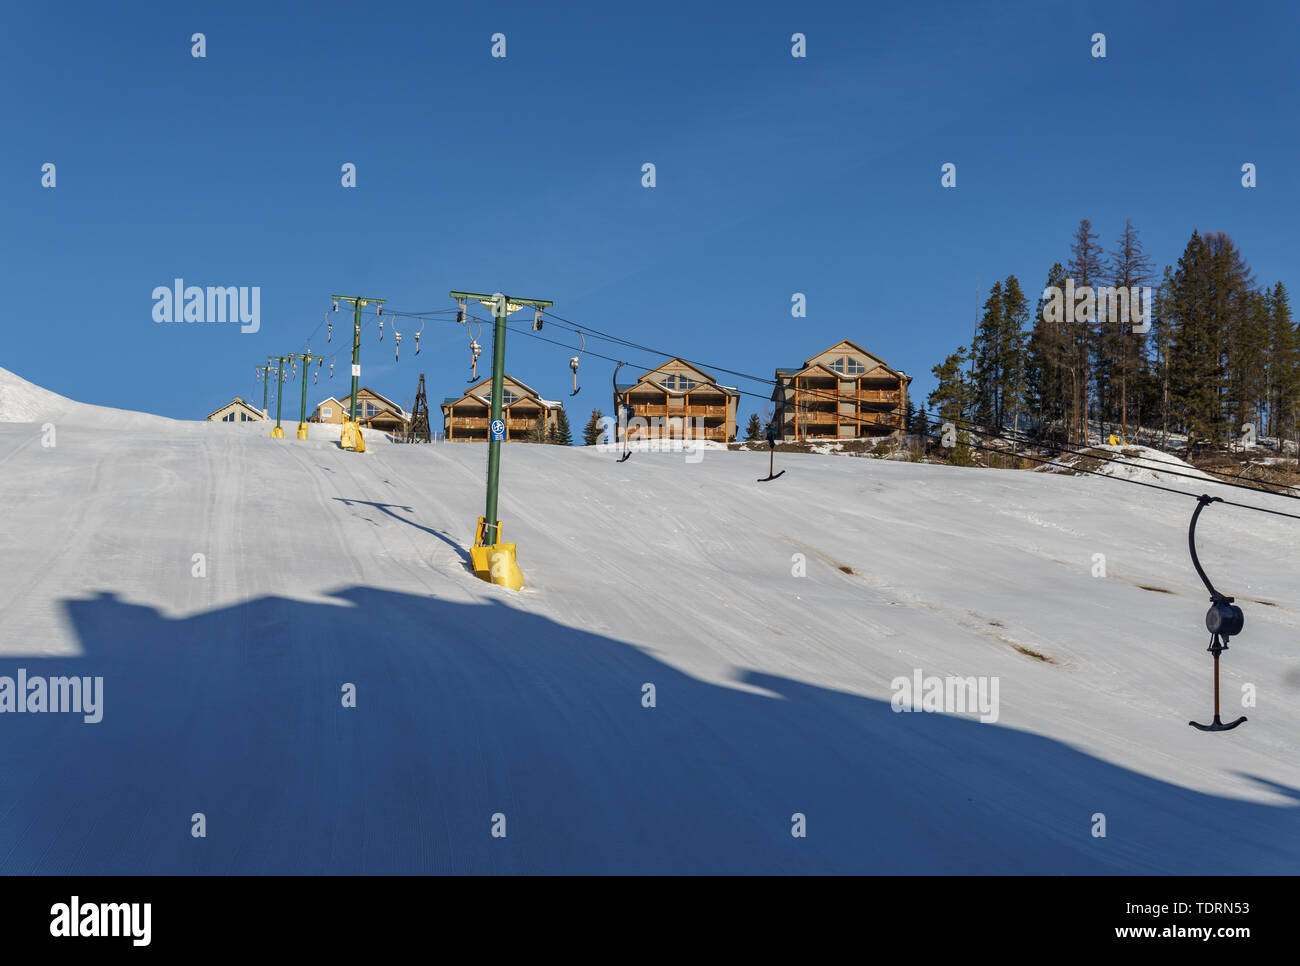 KIMBERLEY, CANADA - MARCH 22, 2019: Mountain Resort view early spring. Stock Photo